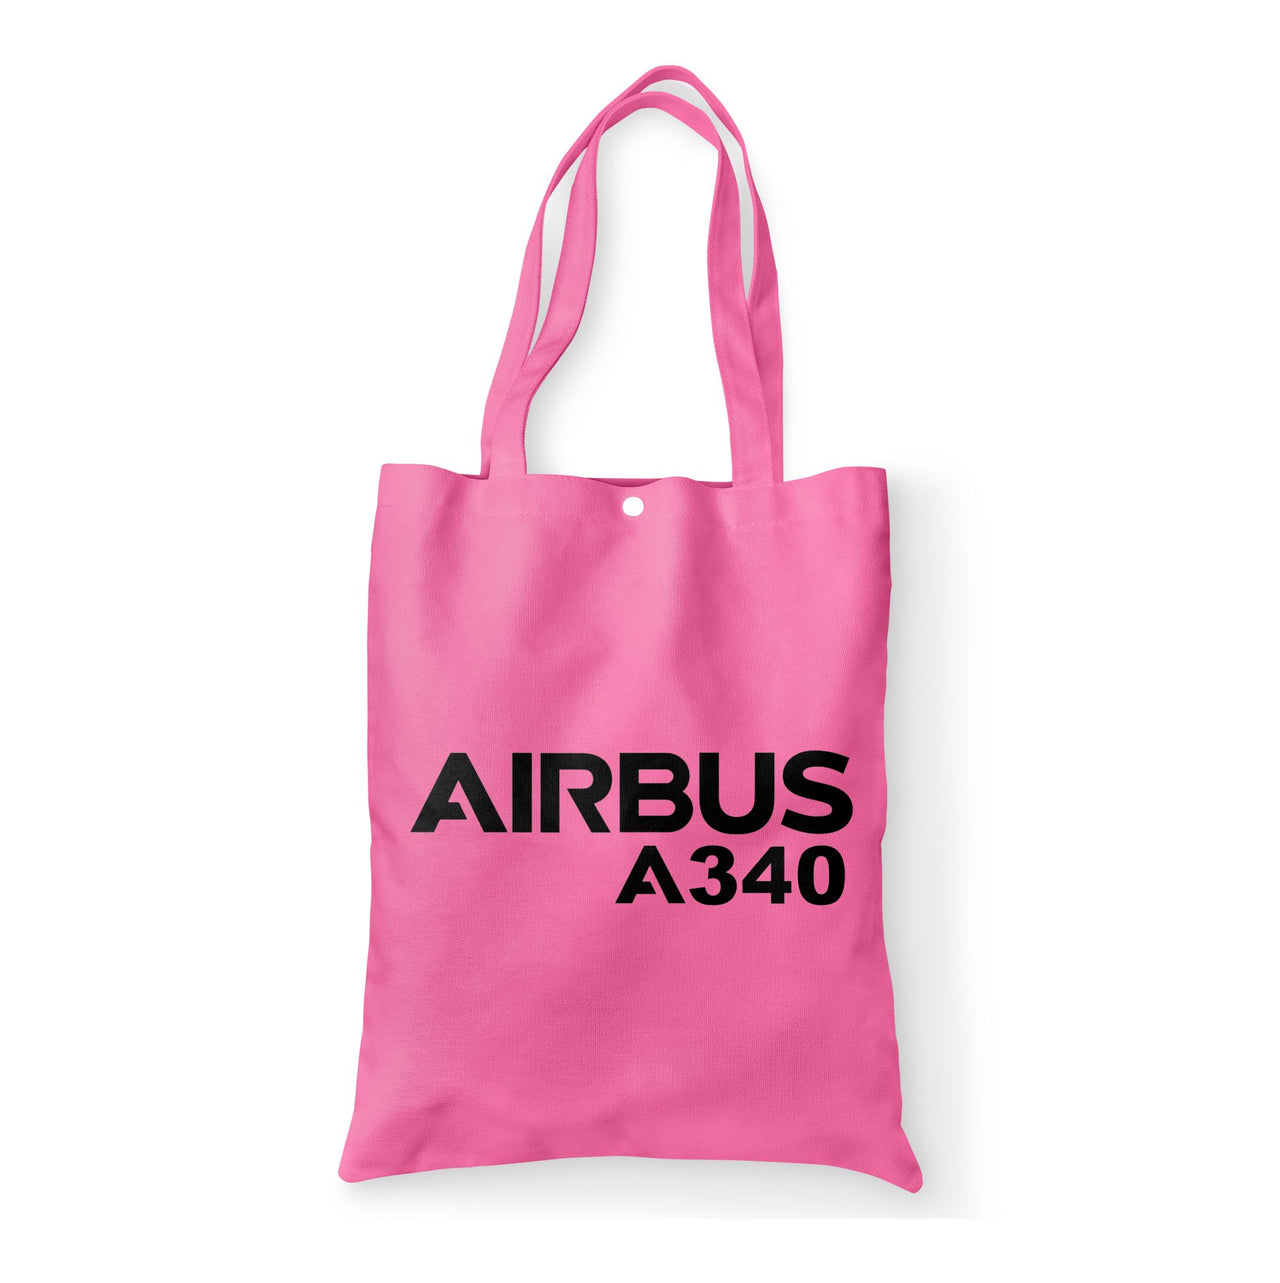 Airbus A340 & Text Designed Tote Bags